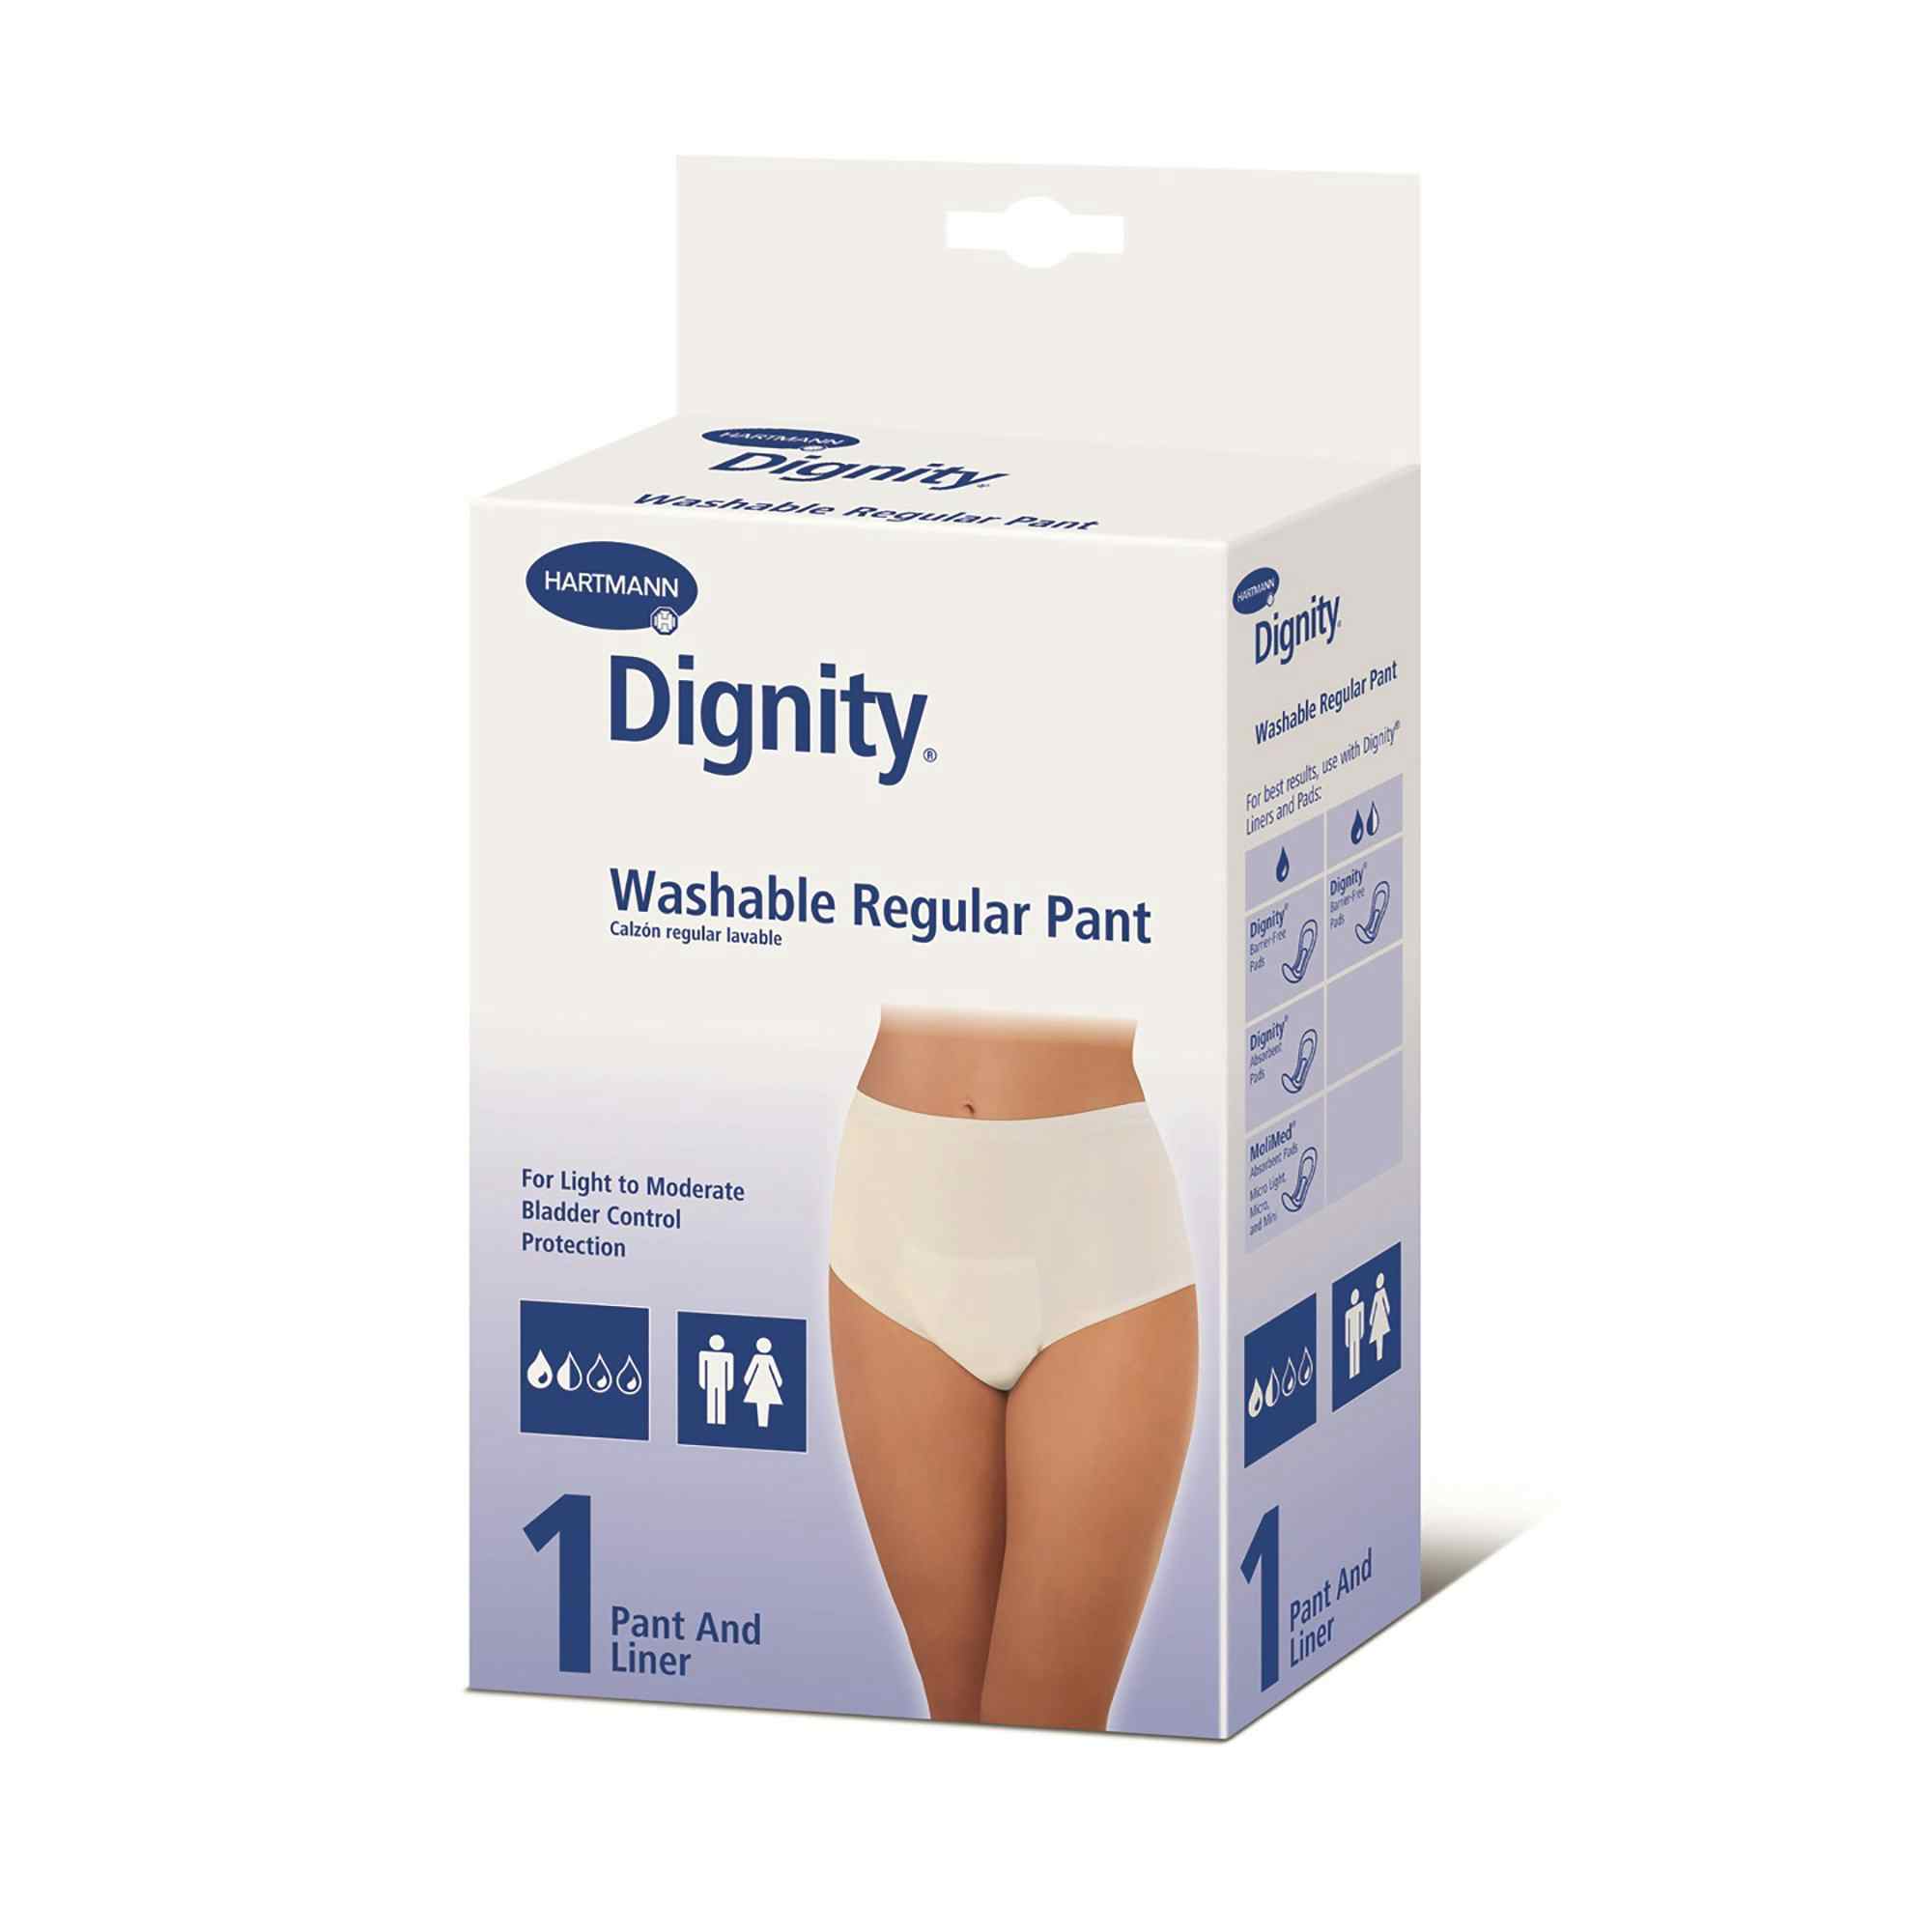 Dignity Unisex Pull On Reusable Protective Underwear with Liner, 16905, X-Large (48-56") - 1 Each